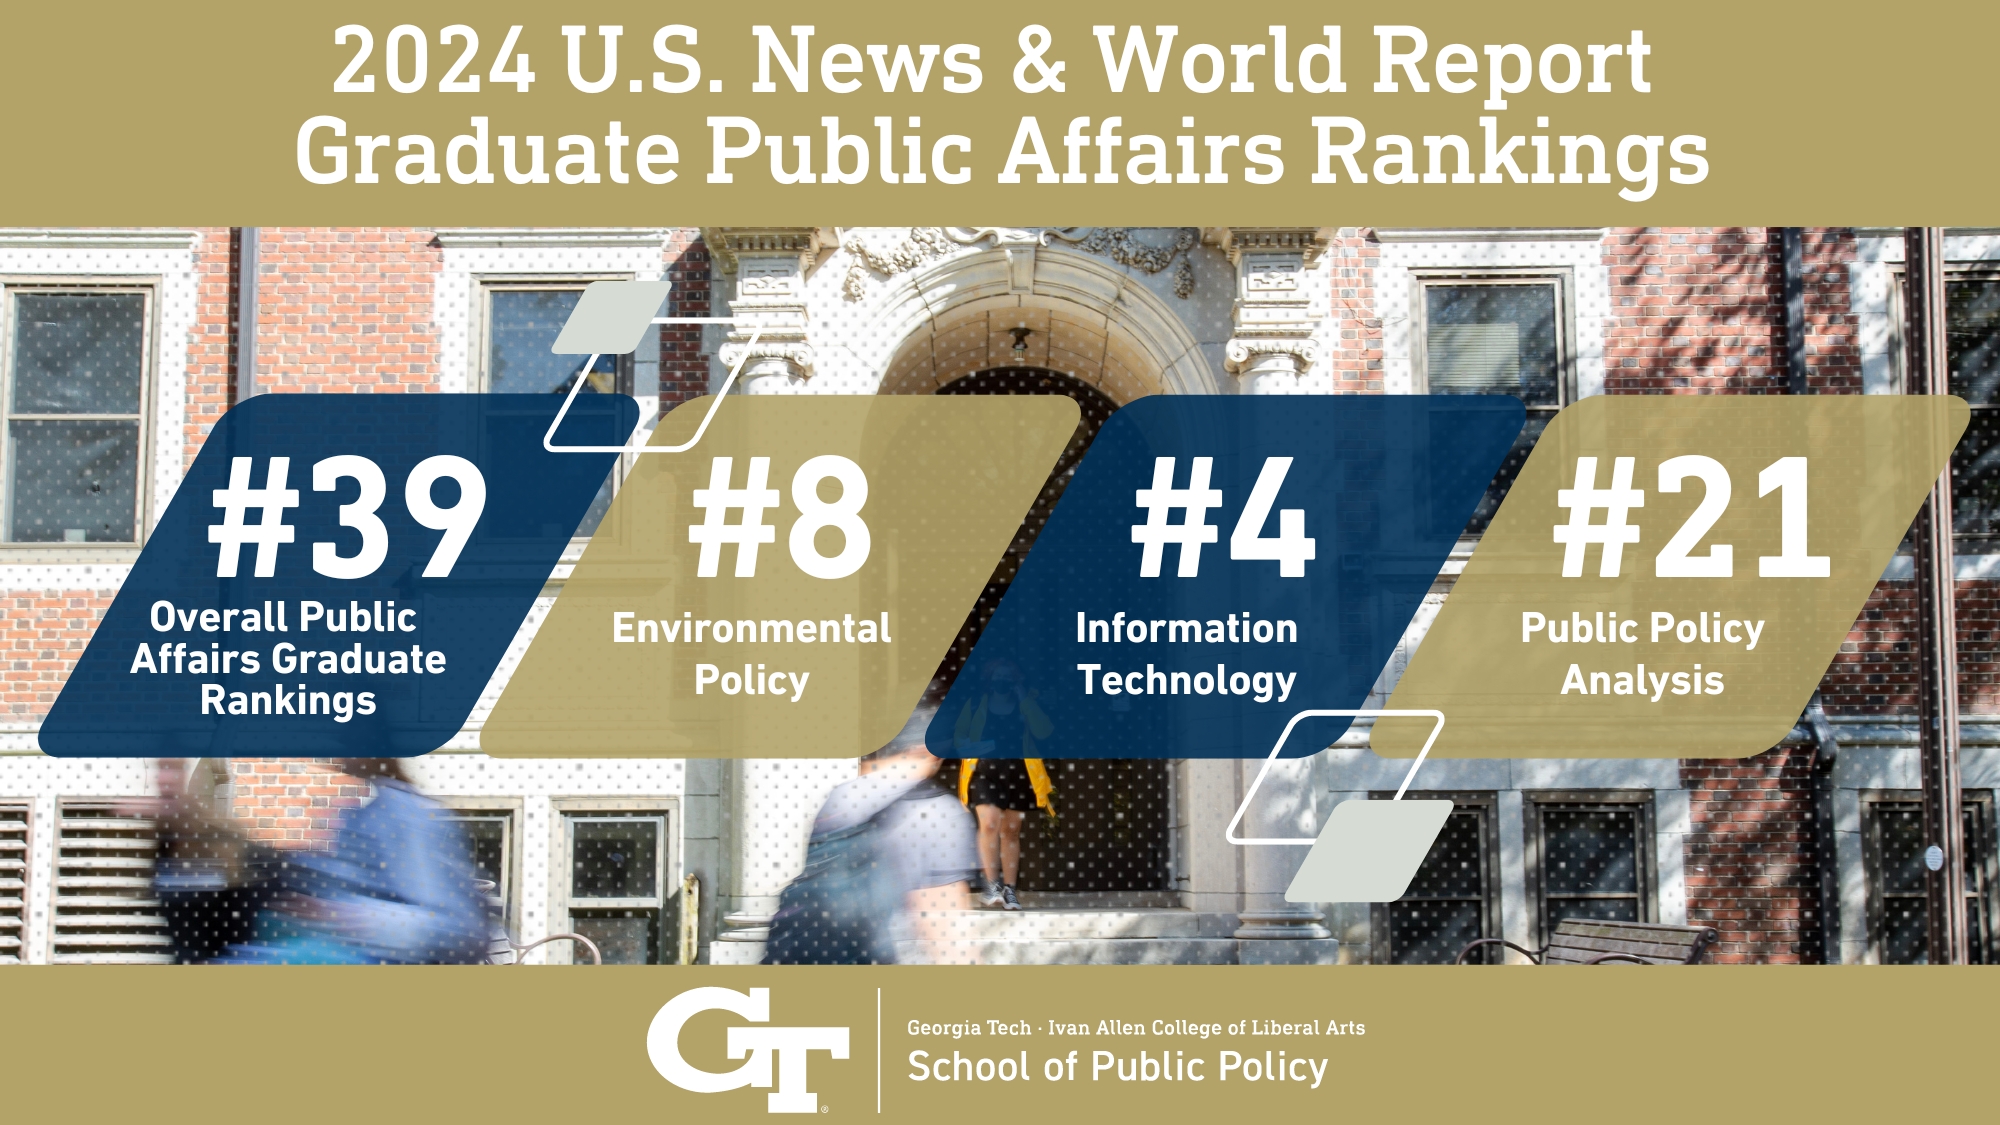 Tech School of Public Policy Climbs in Overall U.S. News